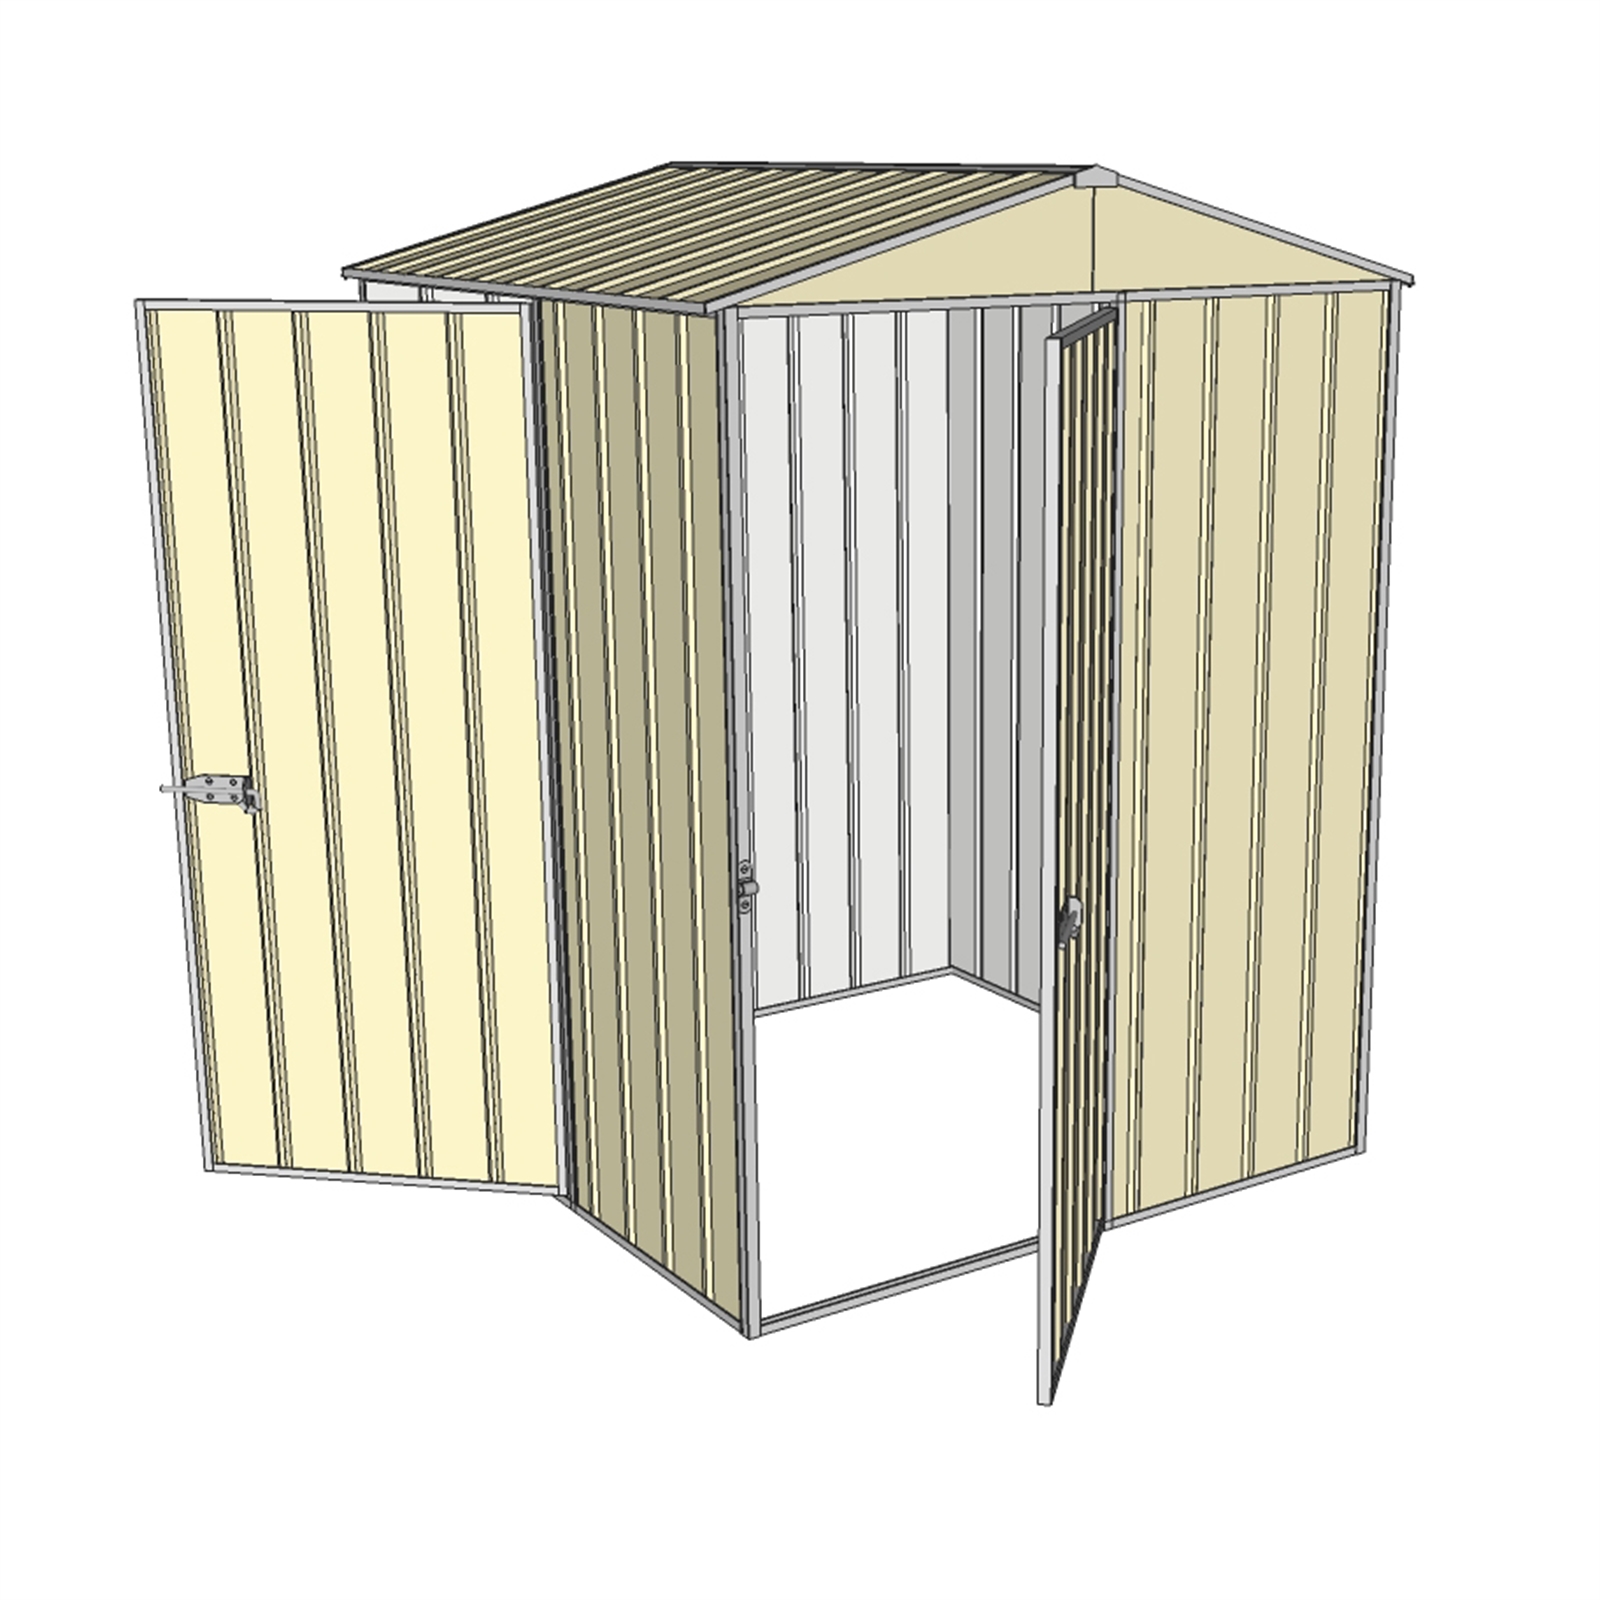 Build-a-Shed 1.5 x 1.5m Cream Front Gable Two Single Hinged Doors Shed